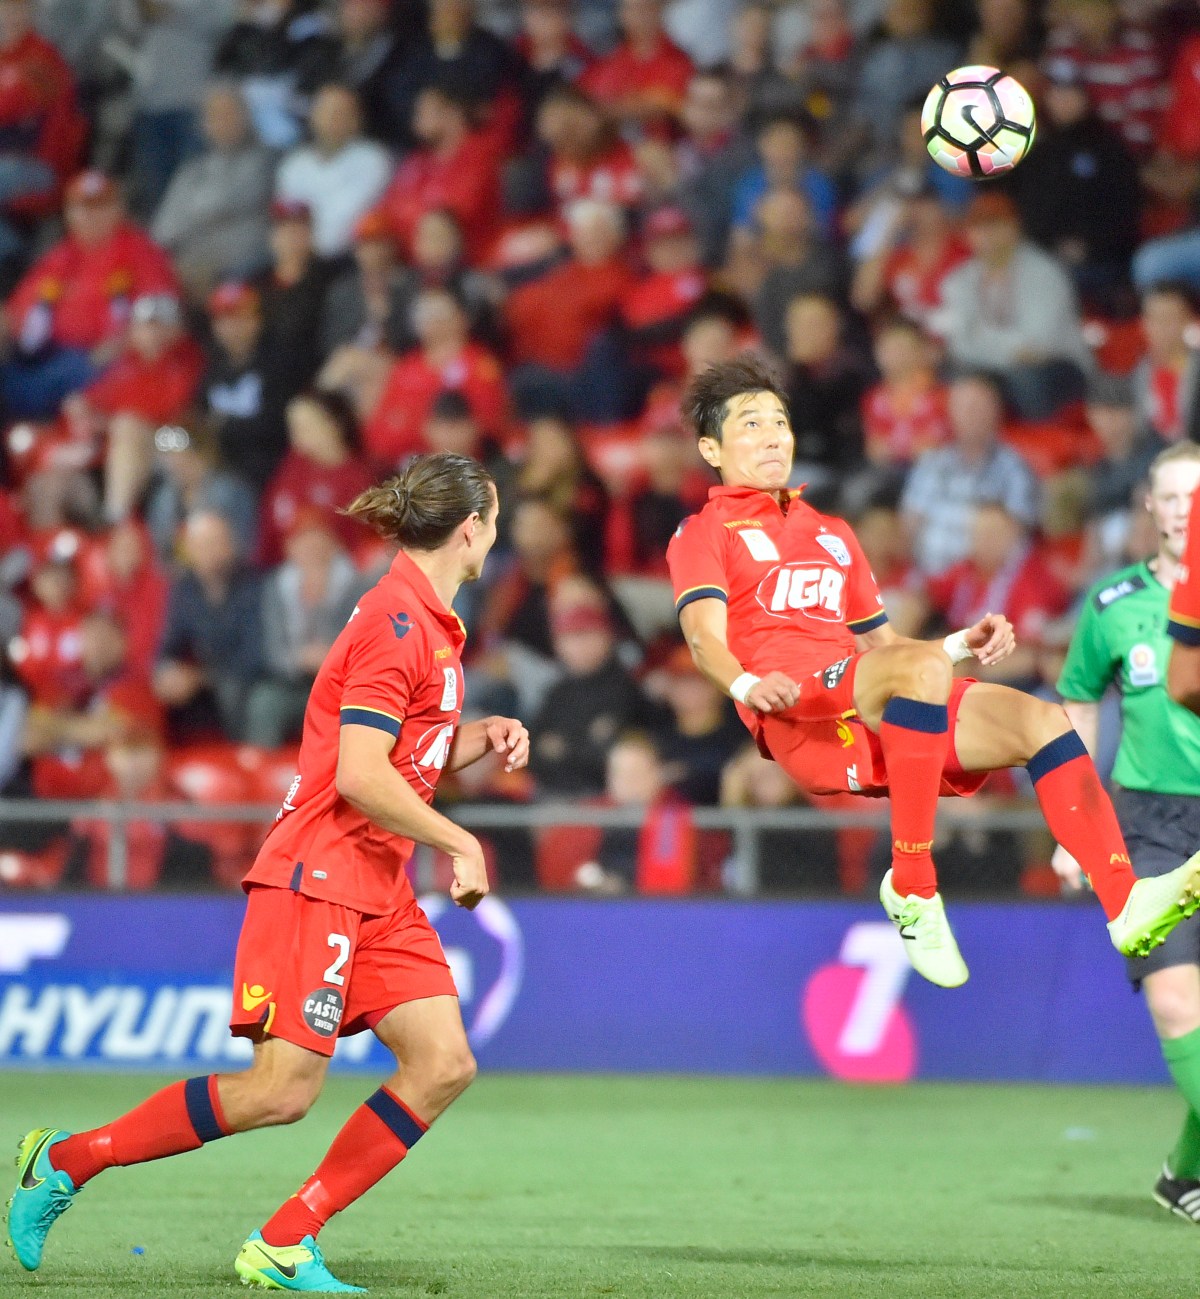 United's Kim Jae-sung of in action against the Newcastle Jets. Photo: AAP/David Mariuz